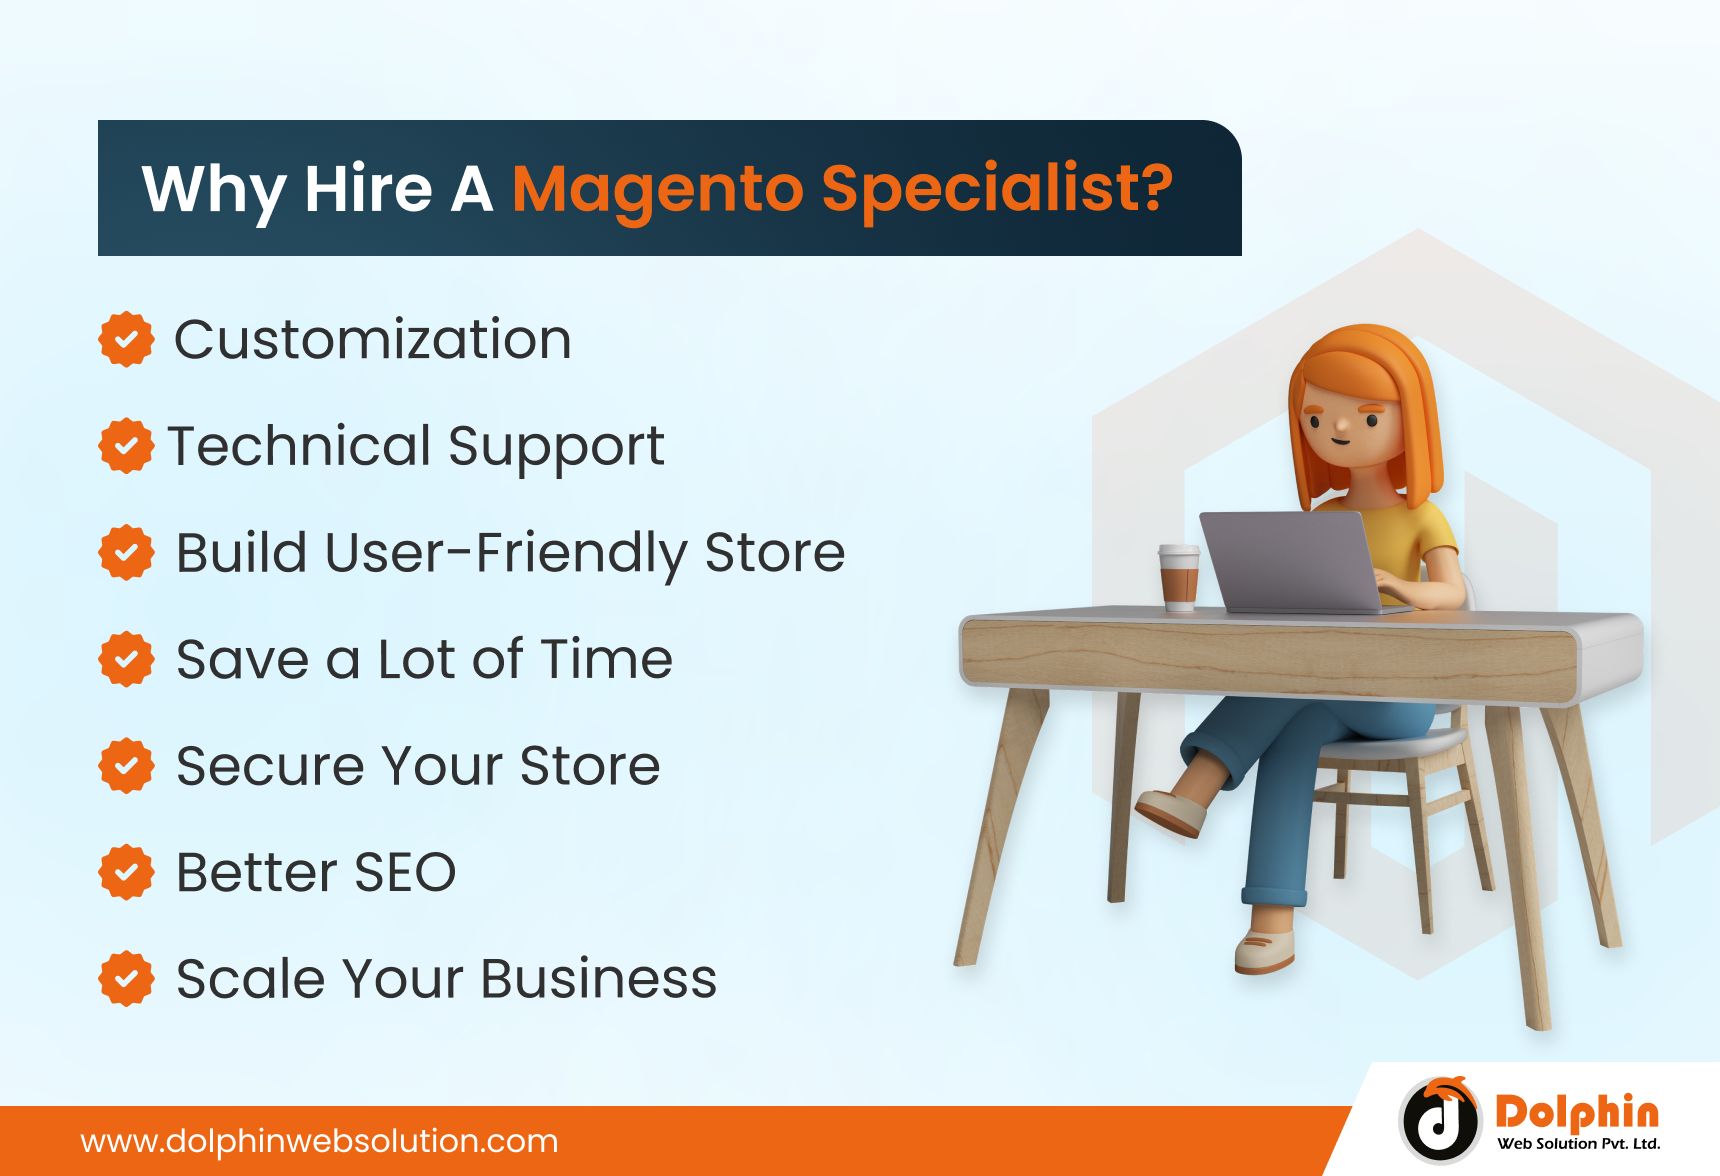 Why Hire A Magento Specialist